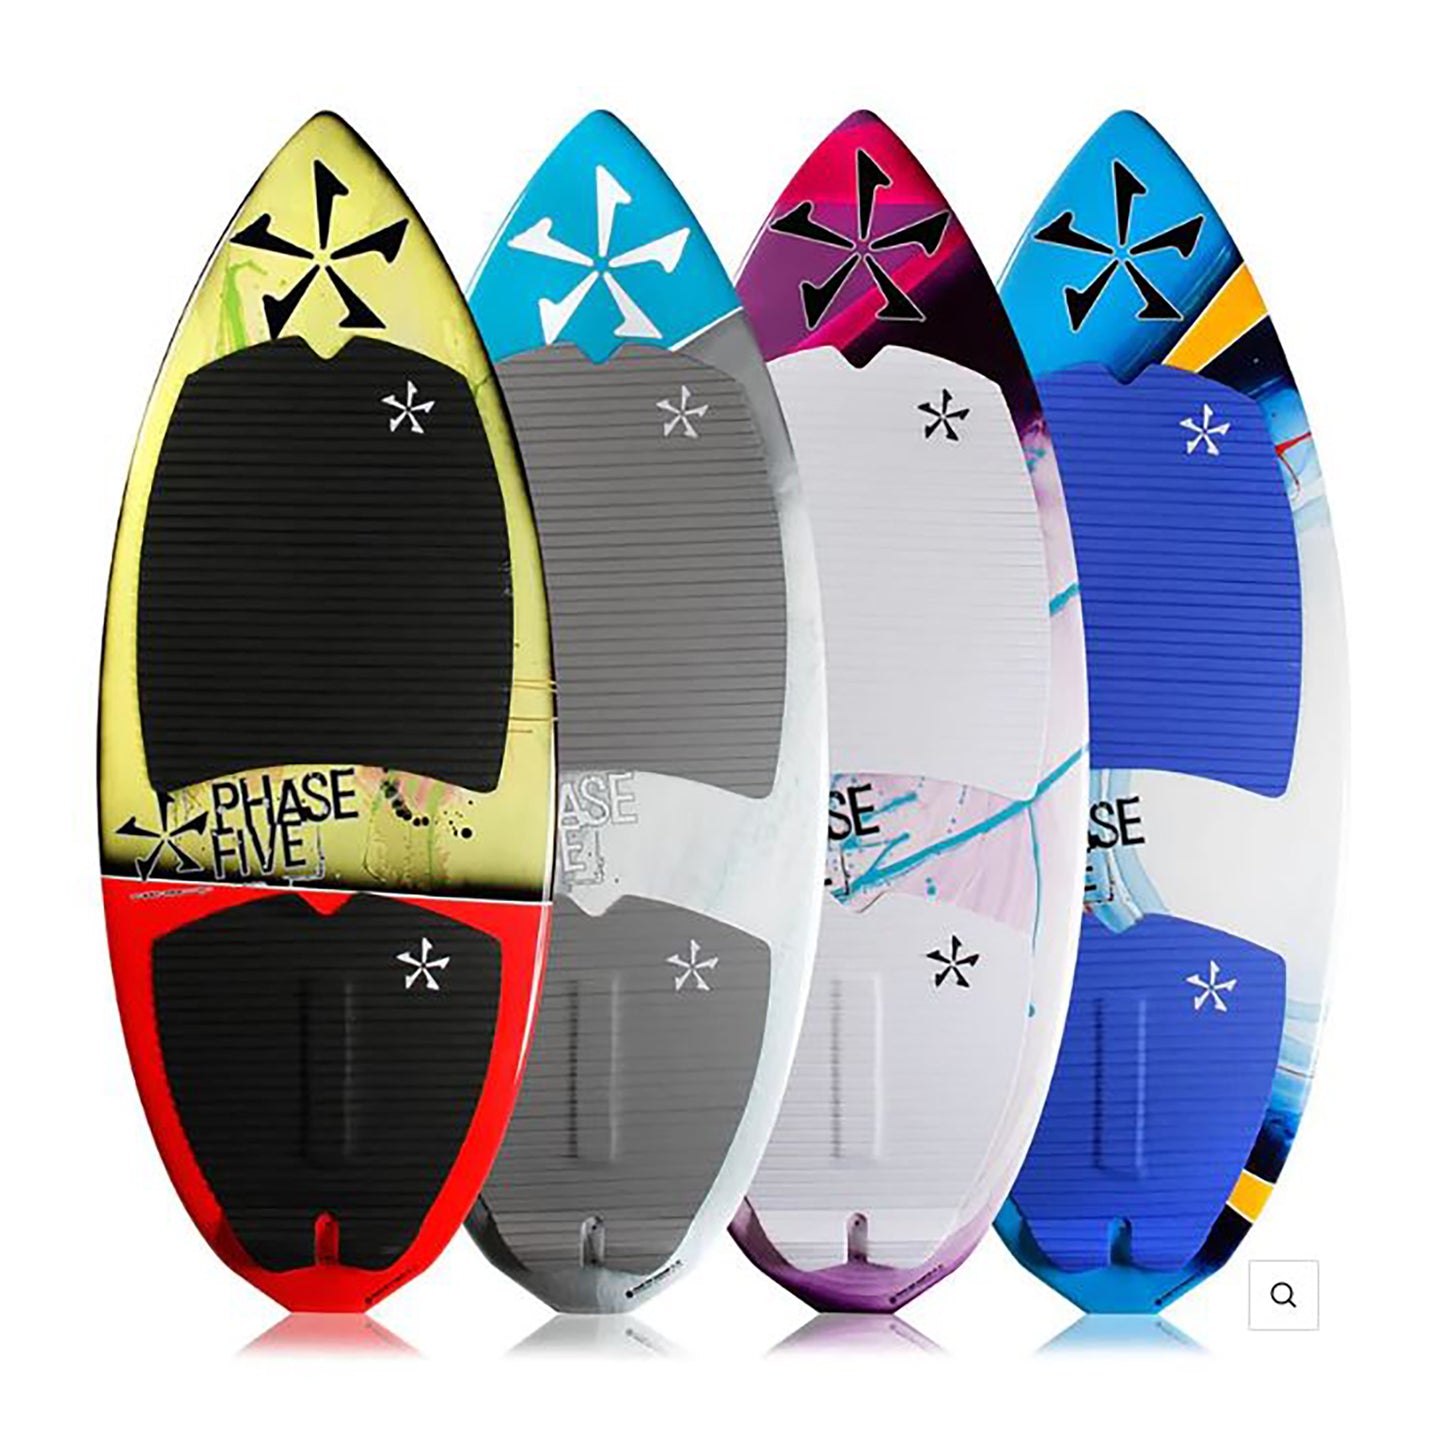 PHASE FIVE DIAMOND CL Wake Skimboard 57" 2021- COLORS MAY VARY